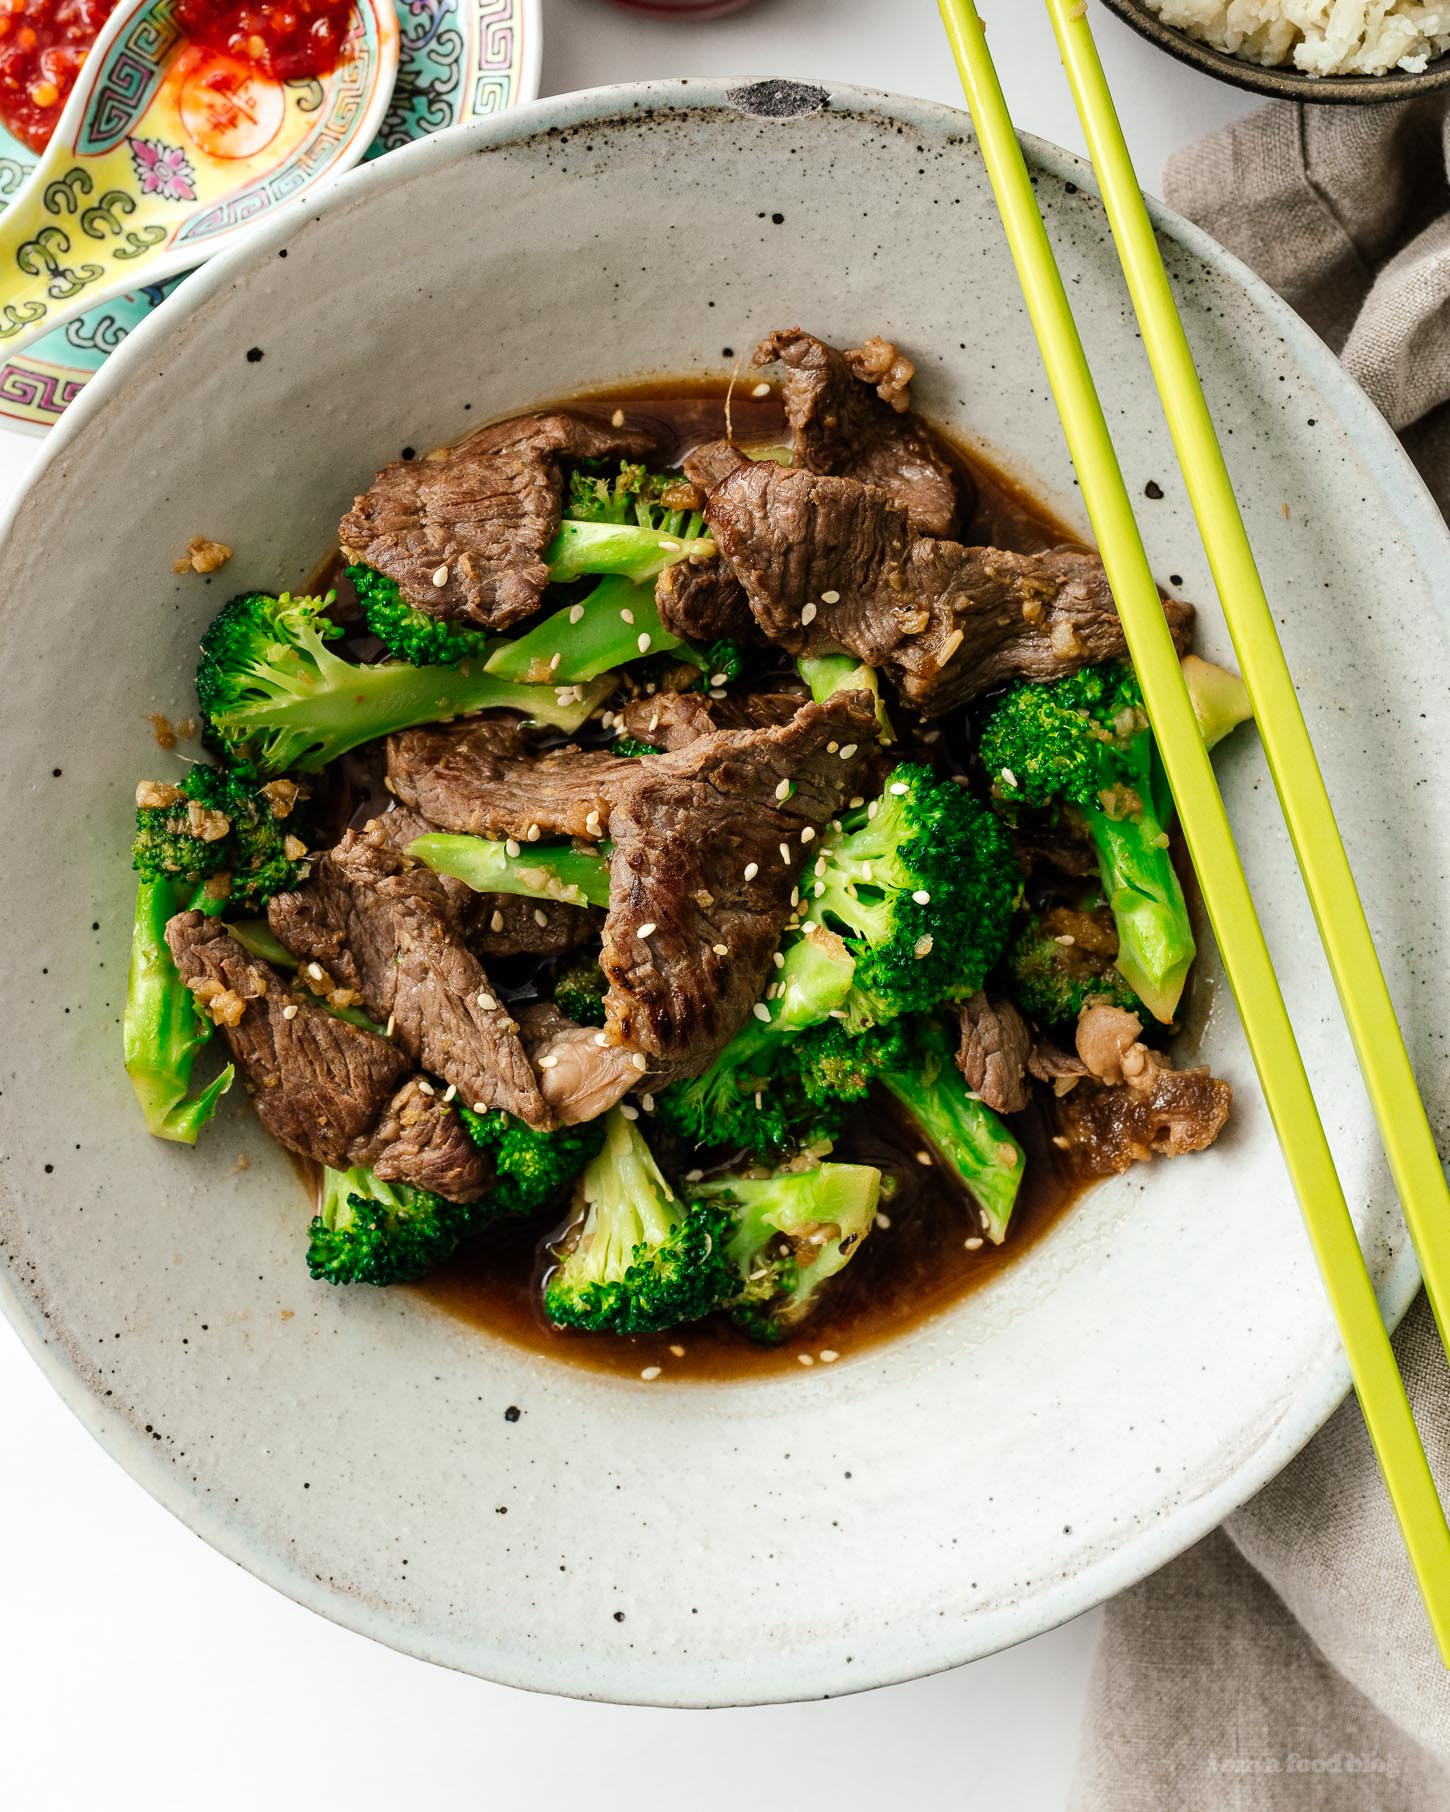 This easy keto friendly low-carb beef and broccoli stir fry is for all my peeps who are trying to enjoy life while still cutting down on carbs. Savory juicy beef and tender green broccoli in an addictive sauce. Super tasty and quick. Meal prep it for the week (double the batch) and you’re golden! #keto #ketofriendly #protein #macros #stirfry #cauliflowerrice #beefandbroccoli